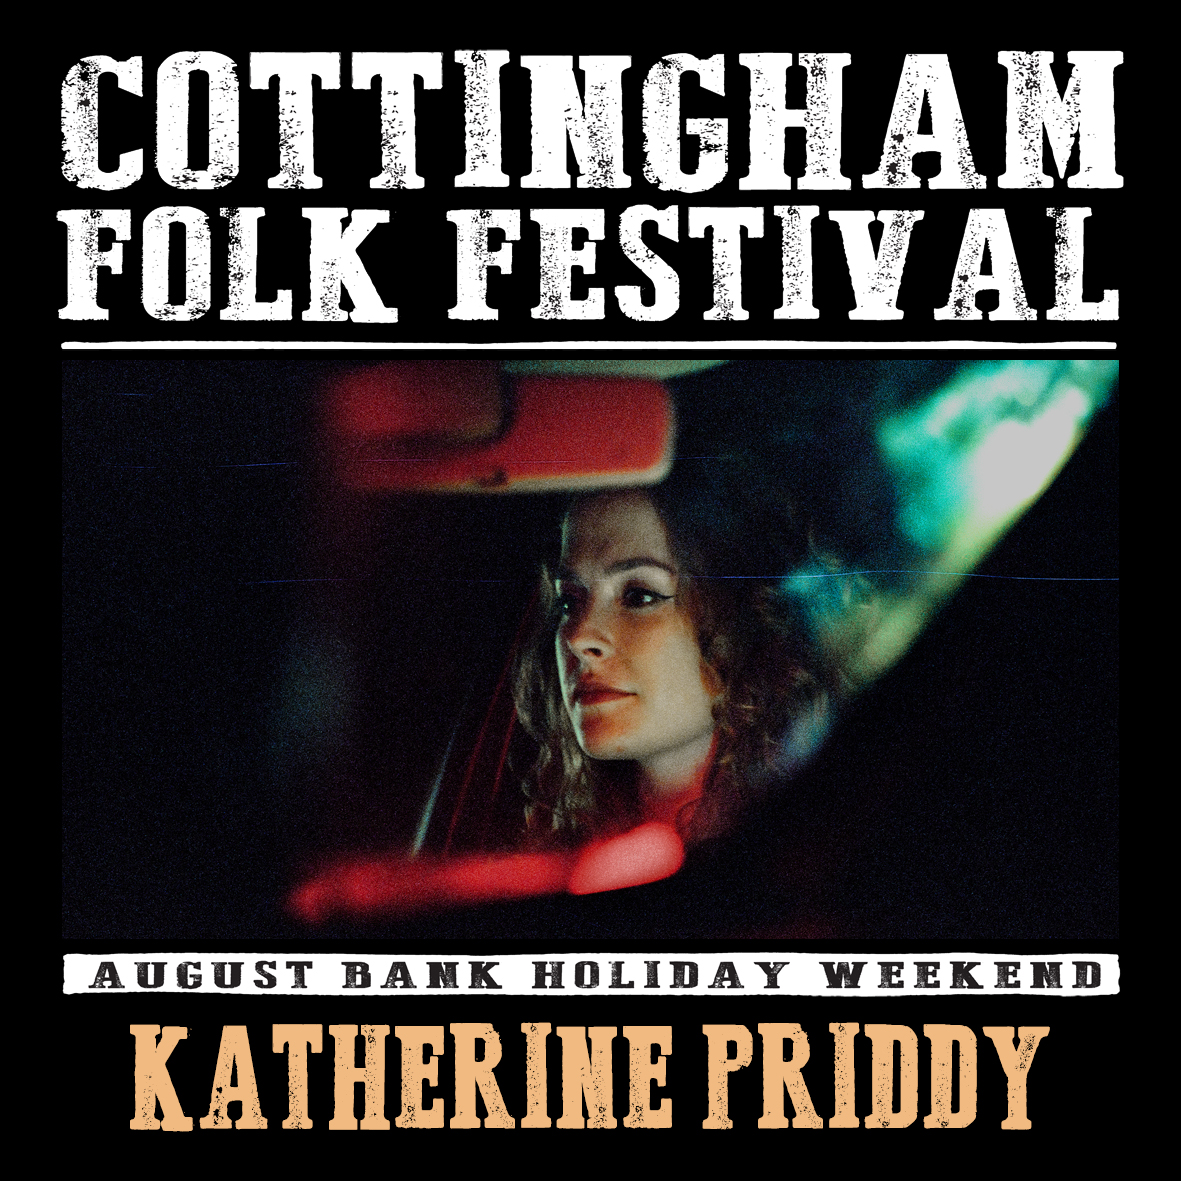 Katherine Priddy has quickly become one of the most exciting names on the British music scene. Her haunting vocals and distinctive finger-picking guitar style have already seen her sell out a headline tour, perform at prestigious festivals and support world class artists.